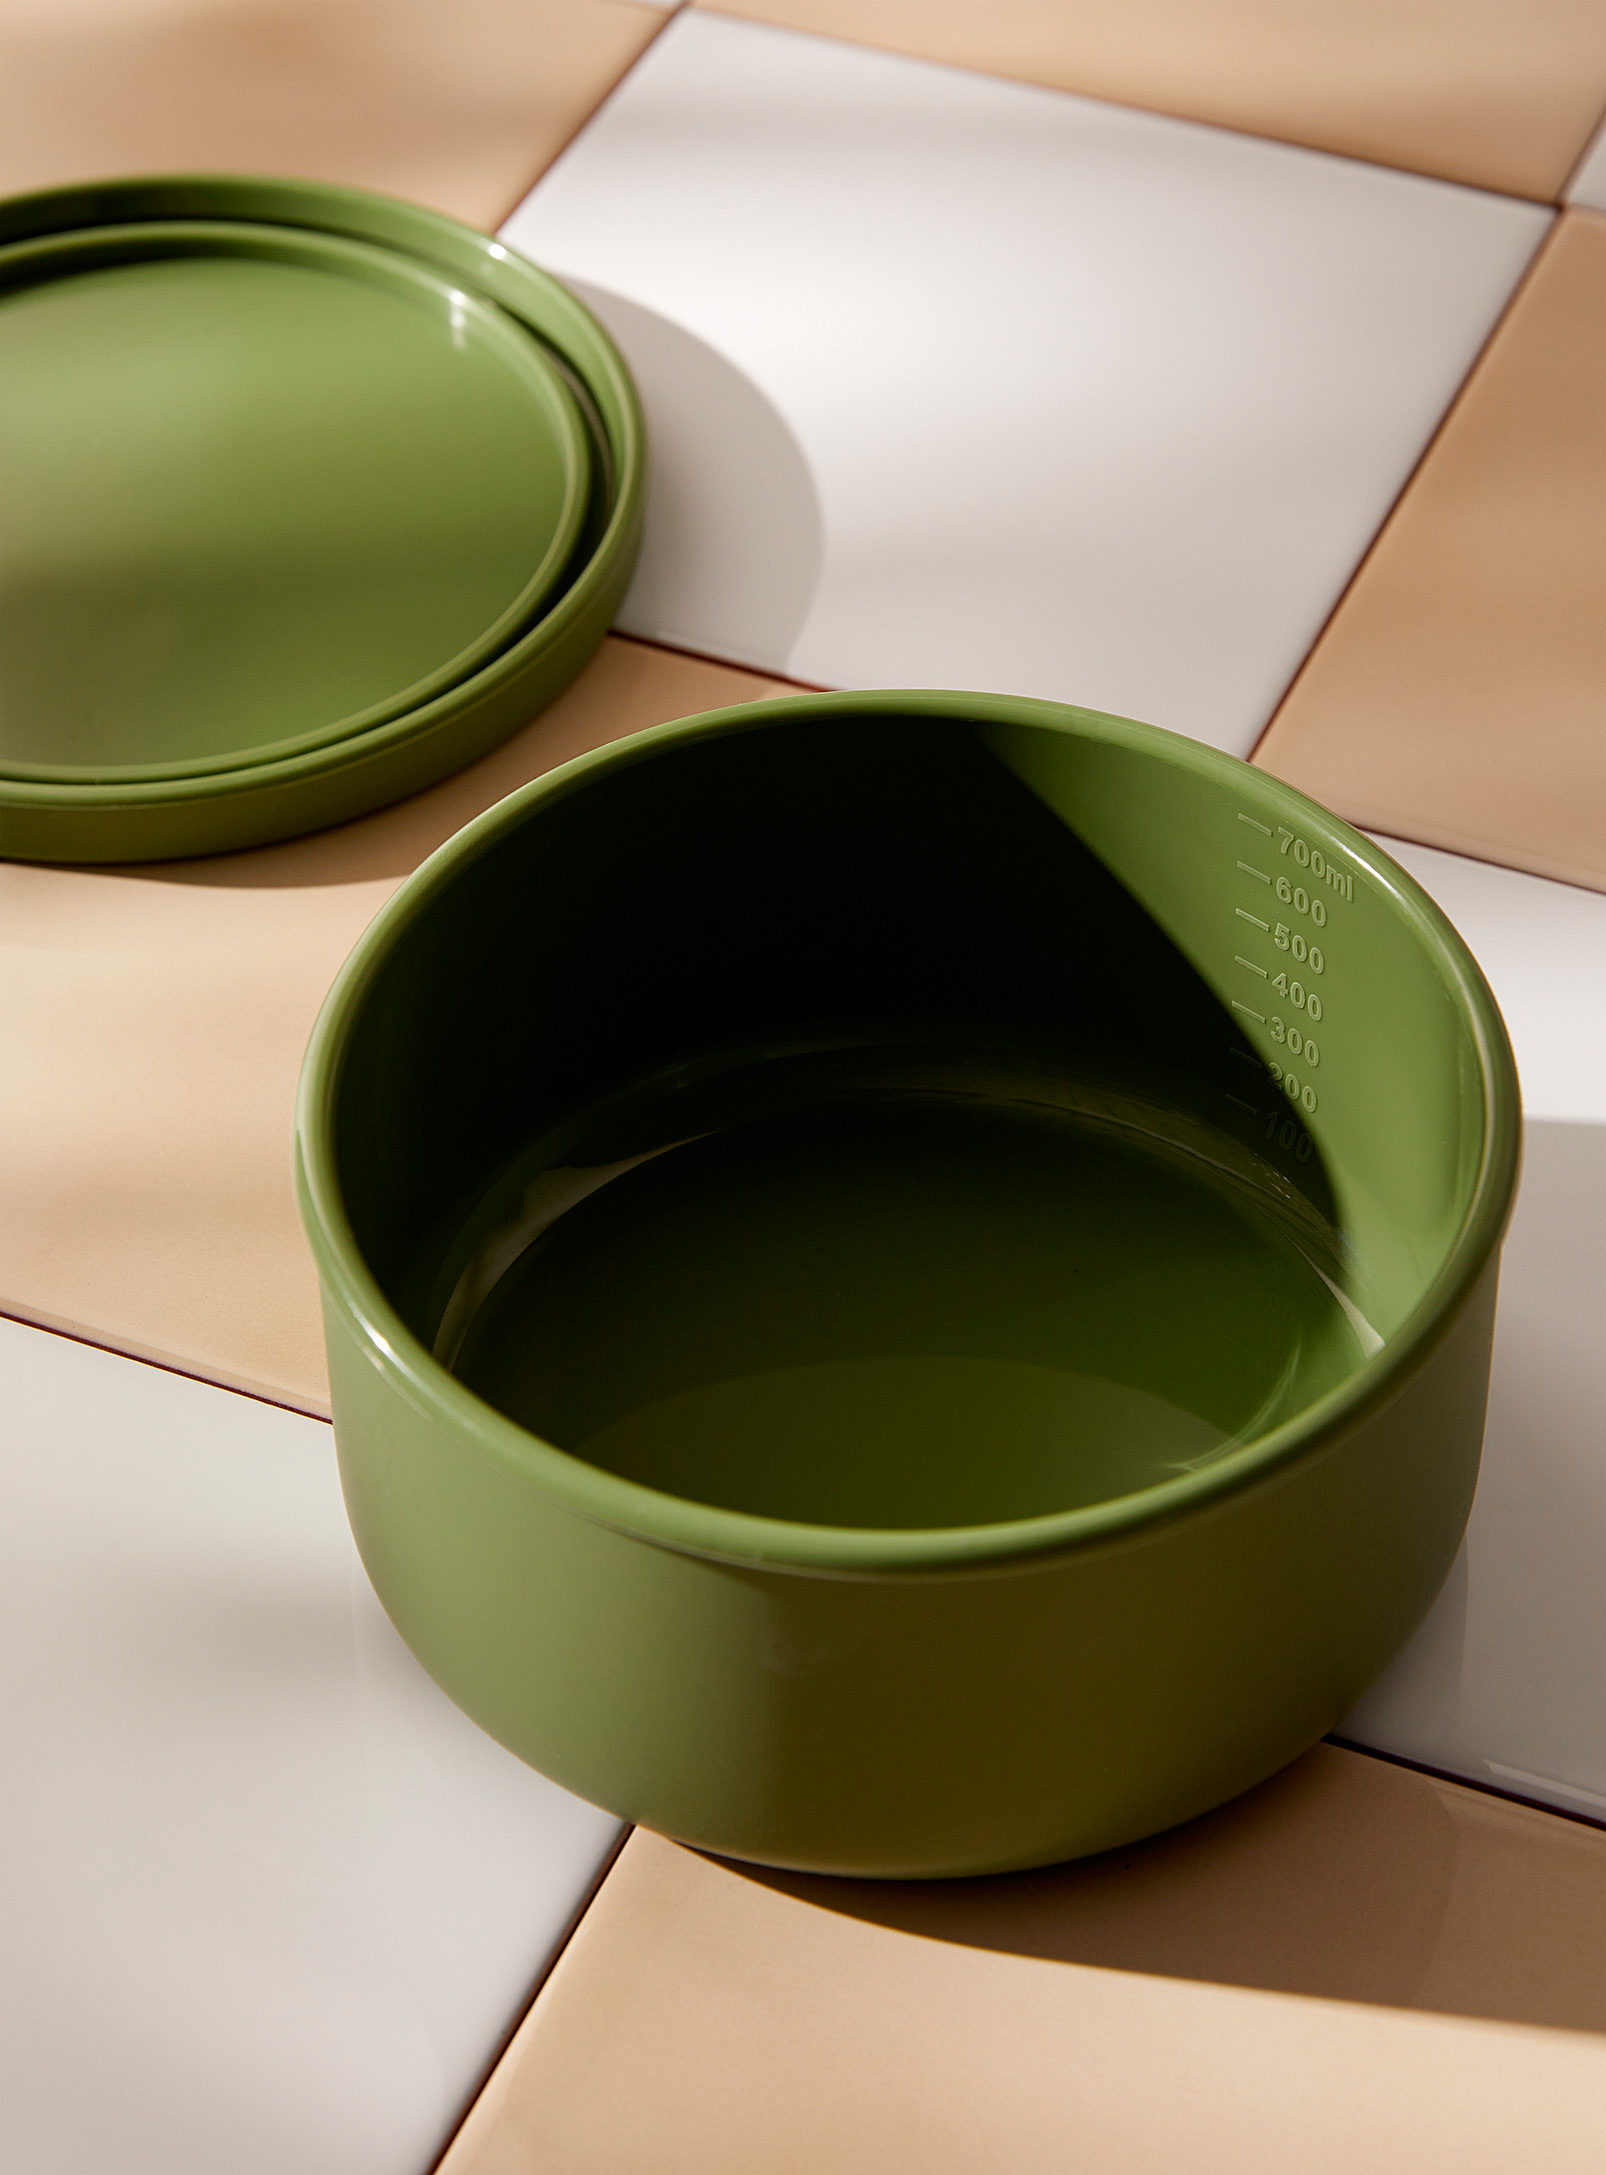 Simons Maison Circular Silicone Lunch Box In Green